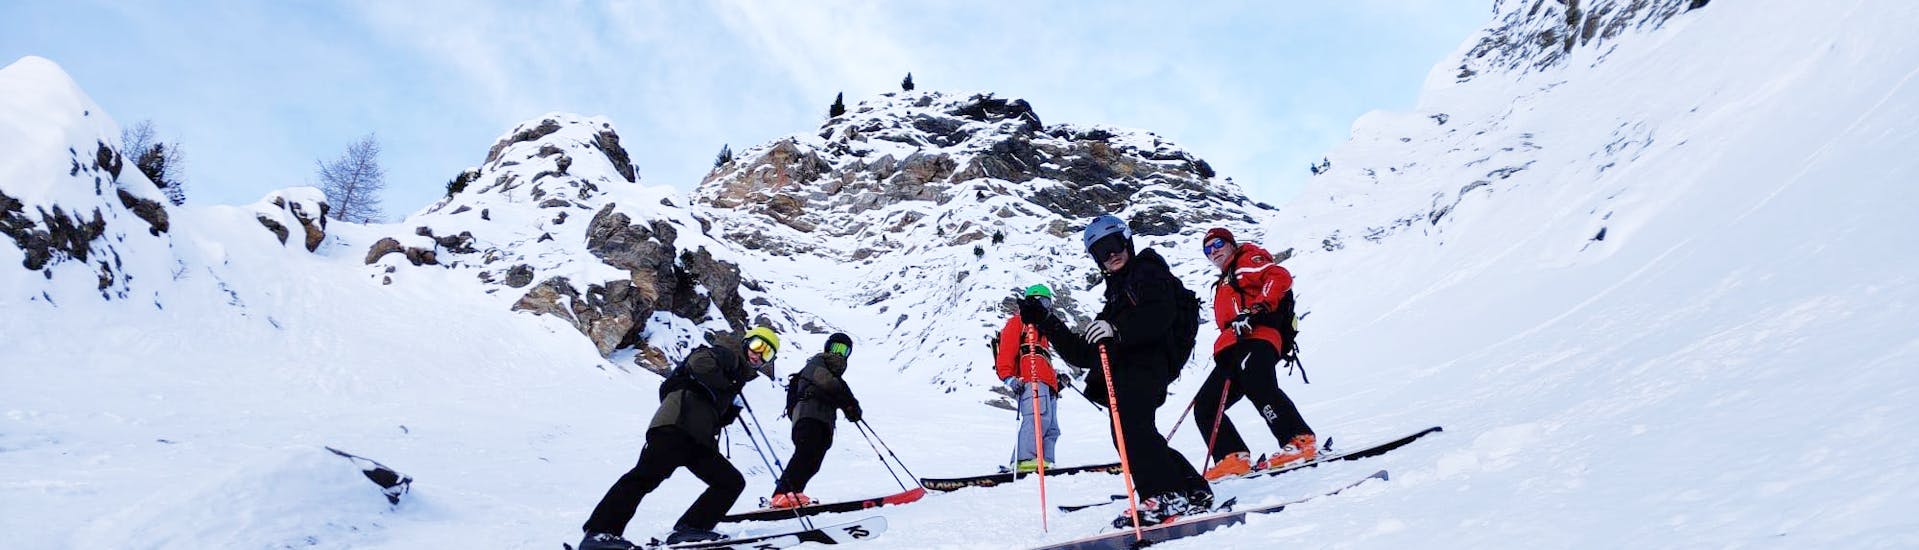 People doing Private Ski Lessons for Adults of All Levels with Scuola di Sci Monte Bianco Courmayeur.